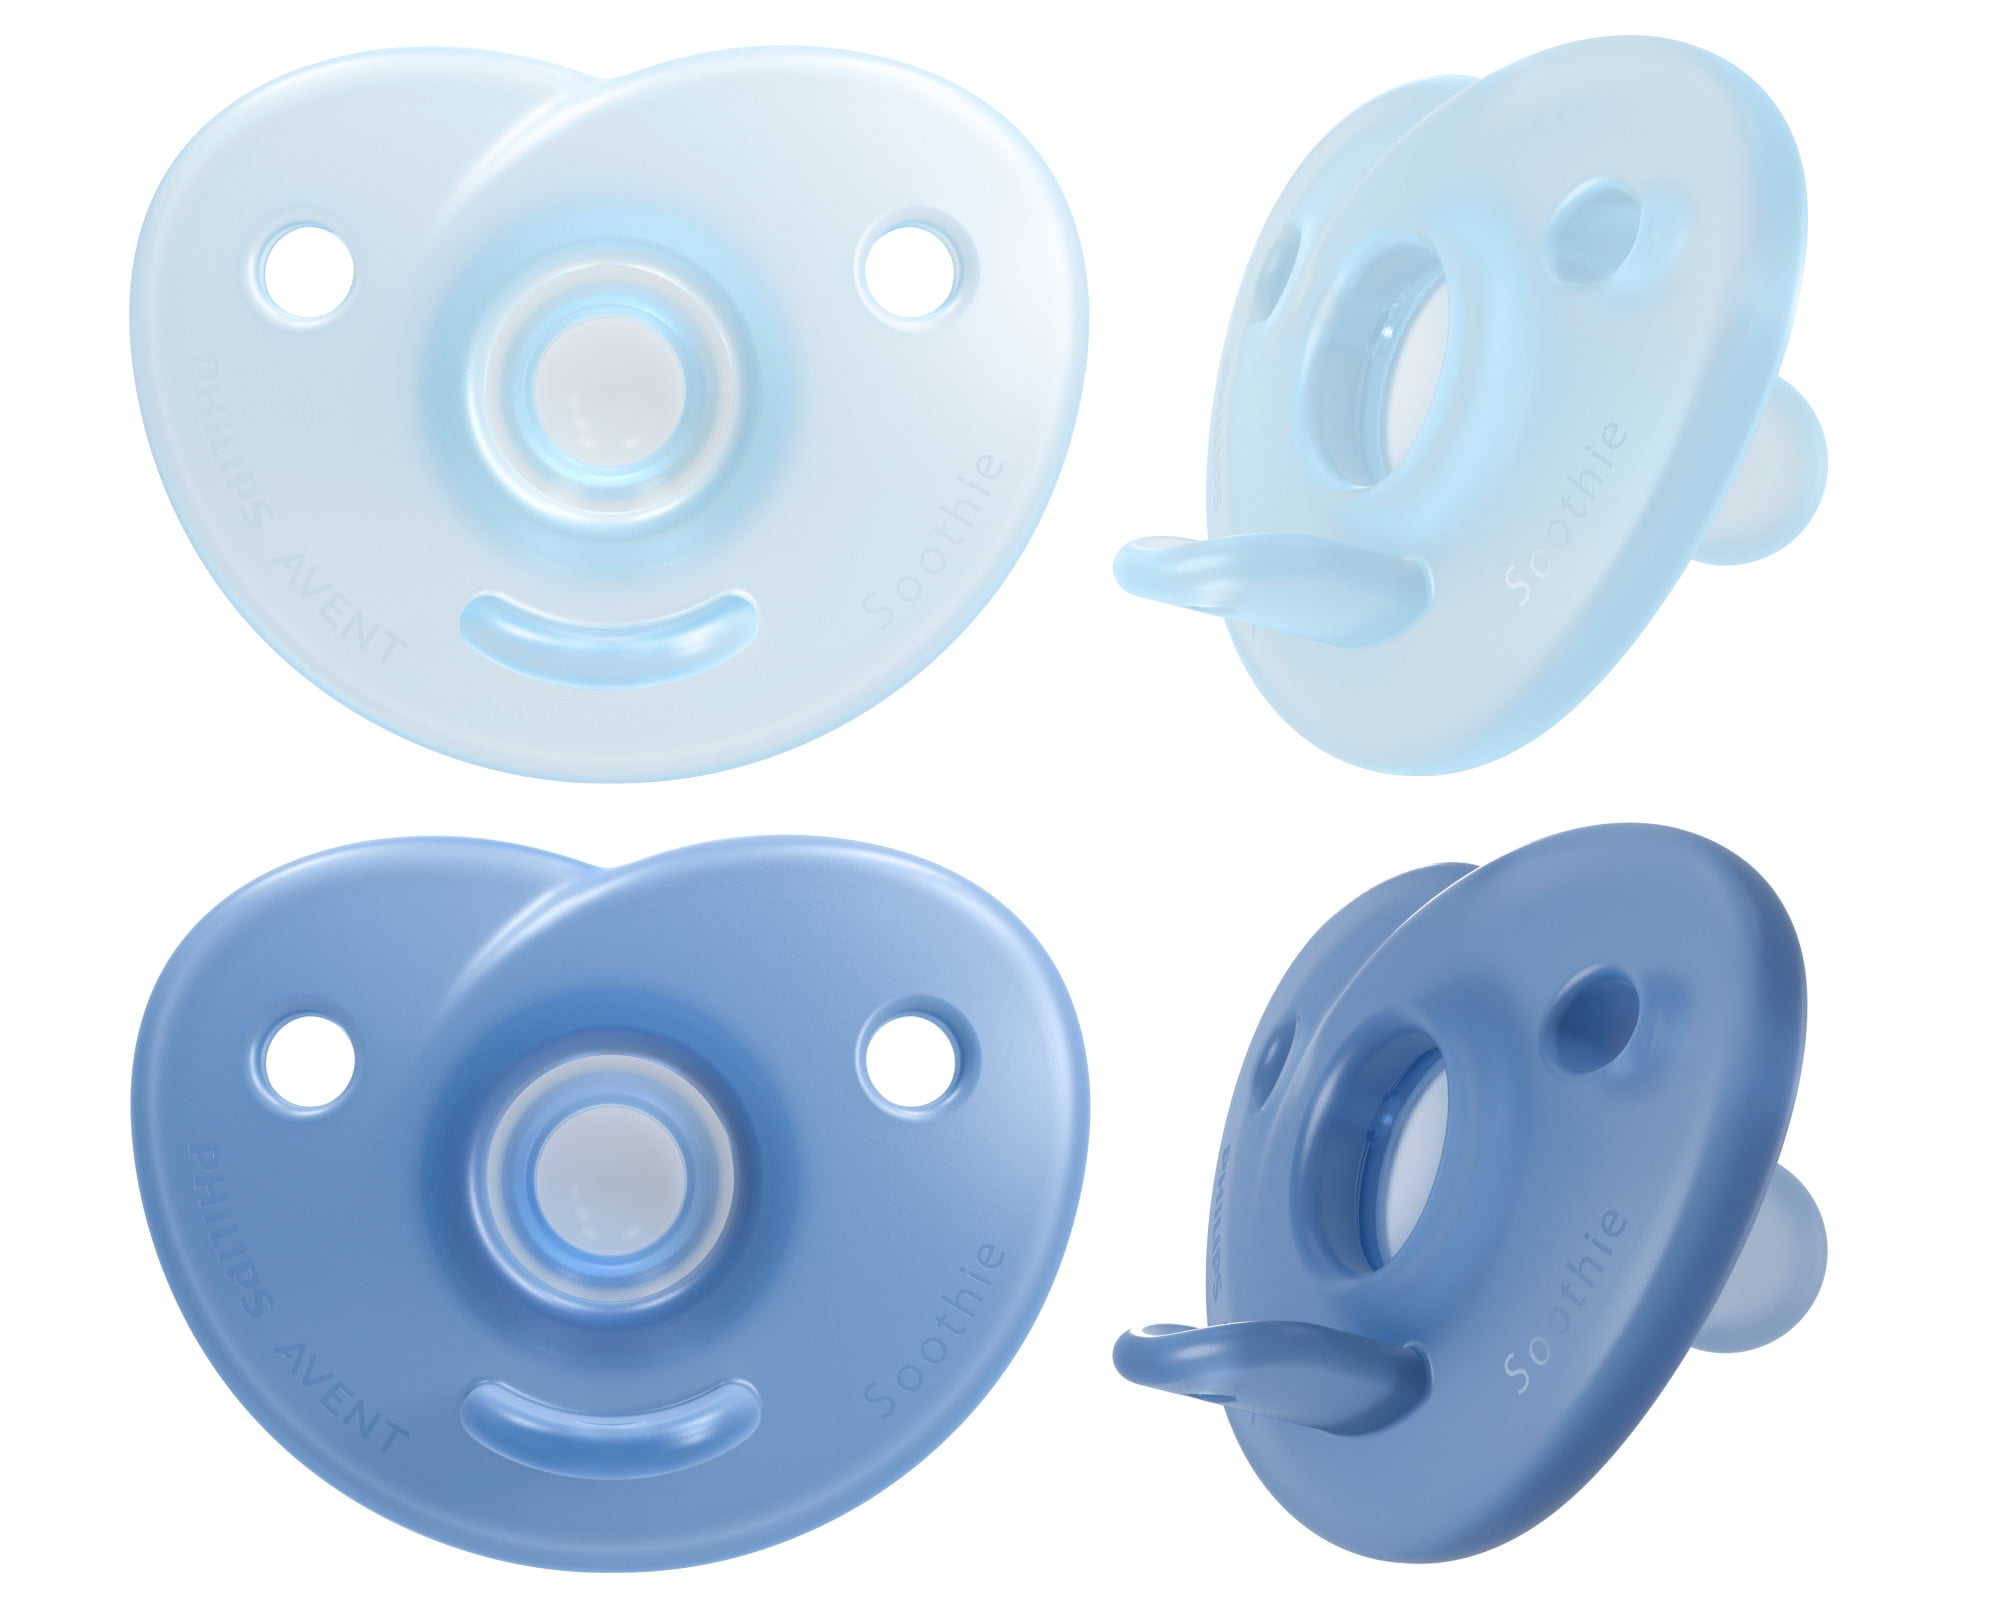 Phillips Avent Soothie 0-3 Months Pacifier Dummy Baby Vanilla Scented 